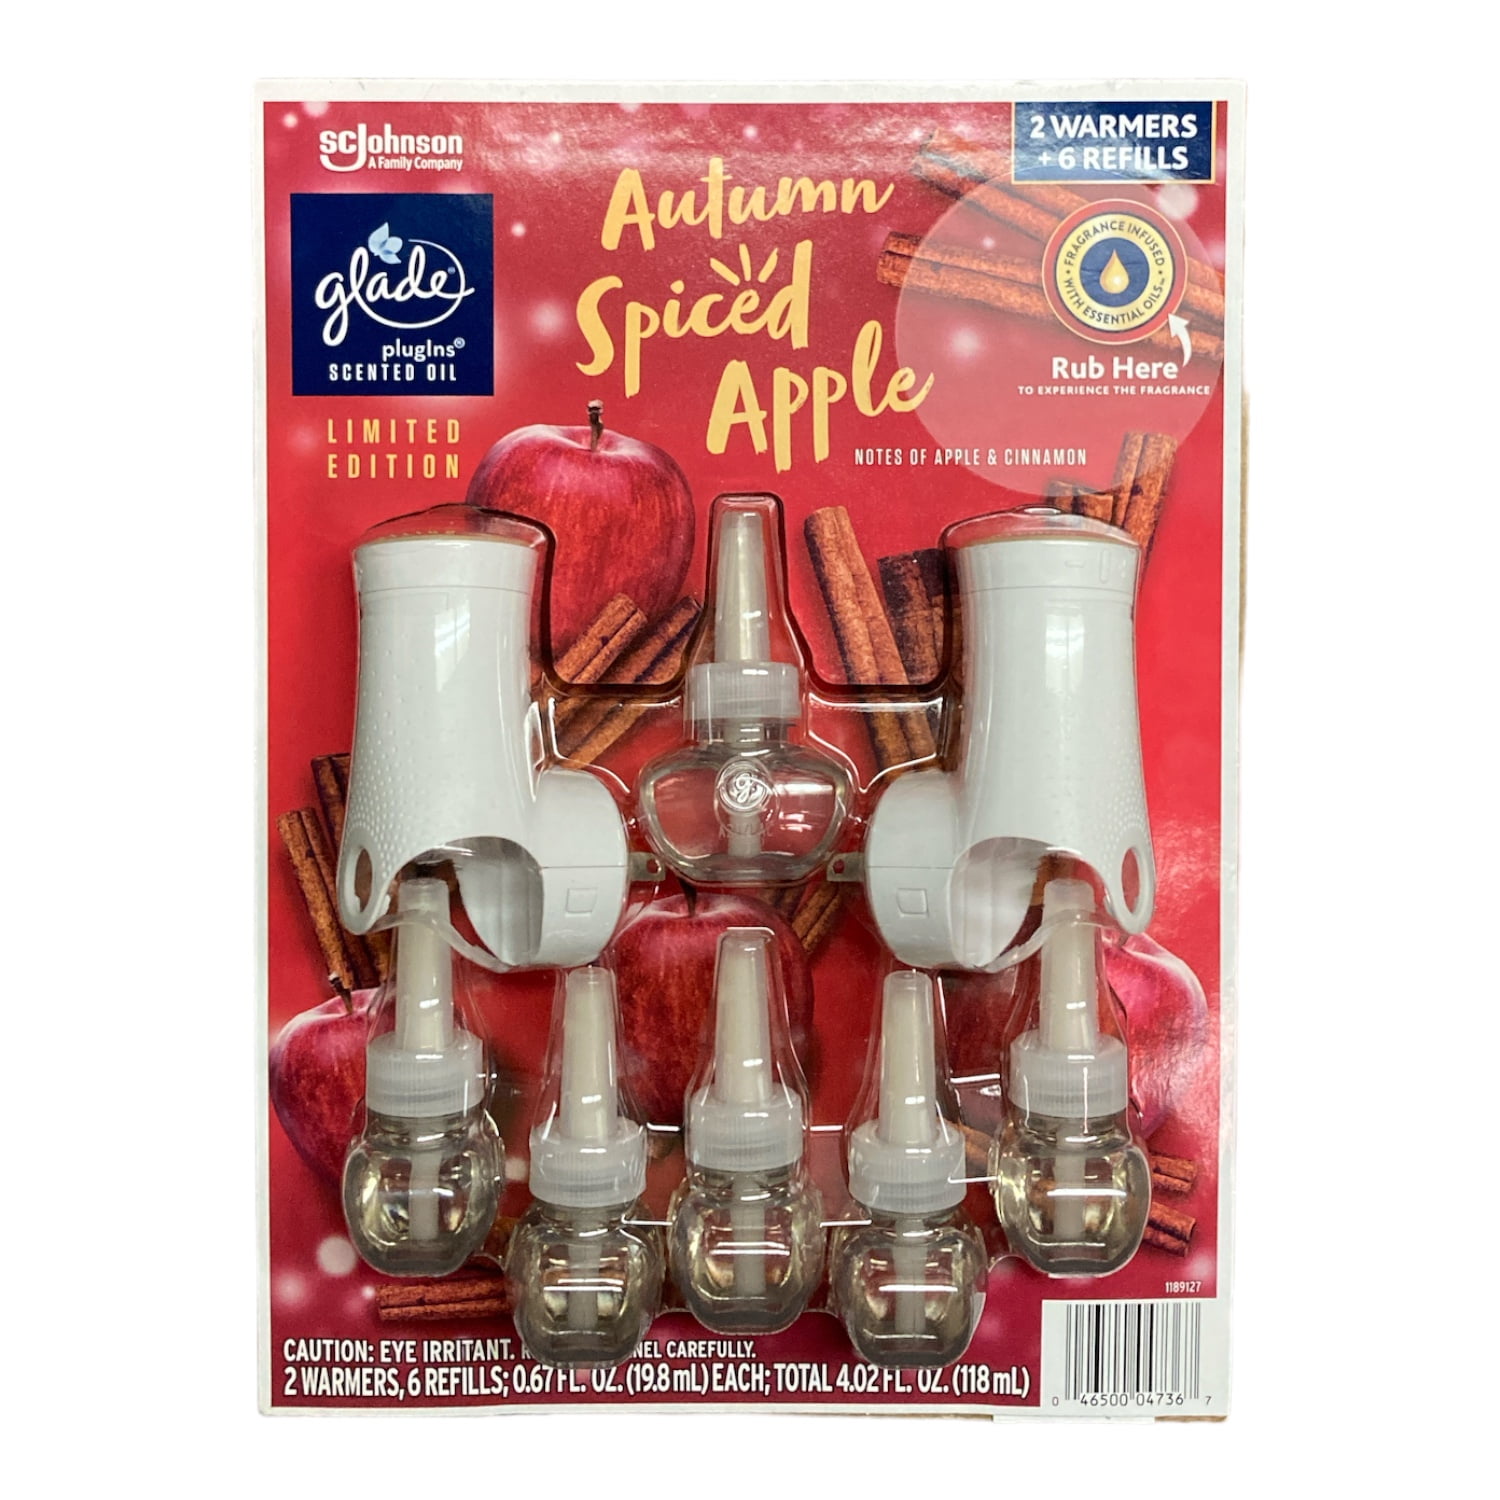 Glade PlugIns Scented Oil 2 Warmers + 6 Refills Autumn Spiced Apple